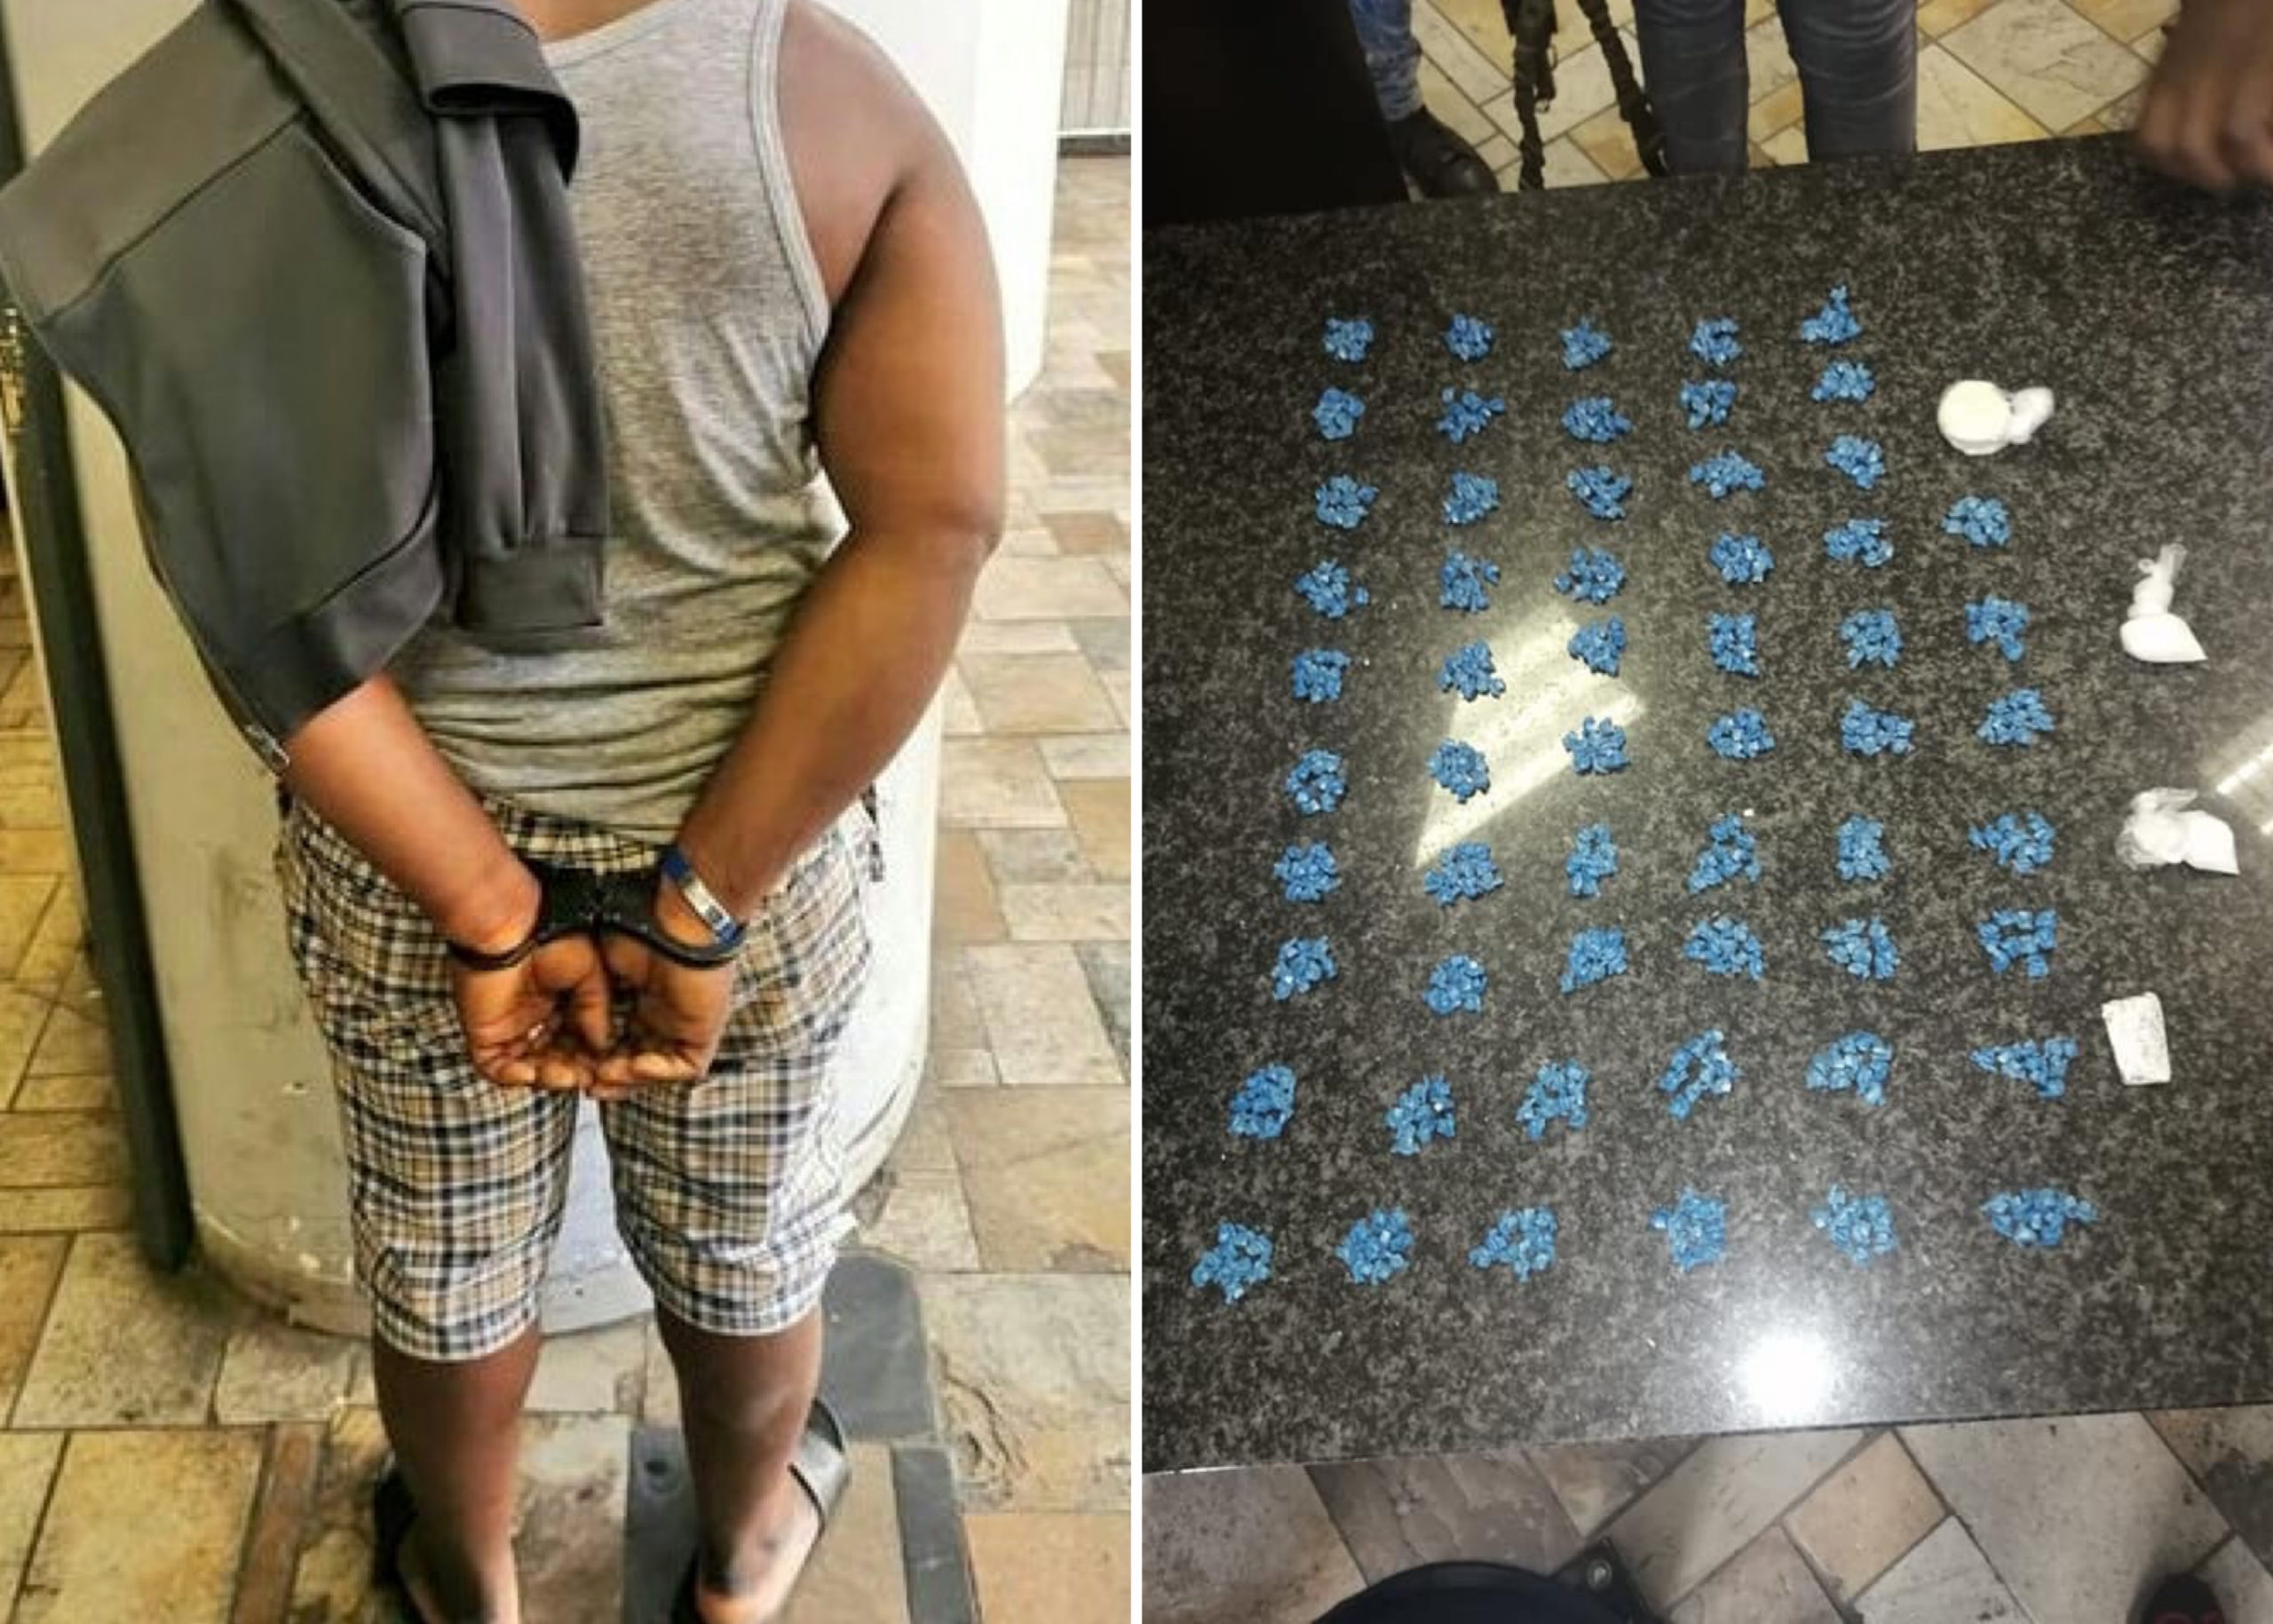 Nigerian Man Arrested In South Africa For Allegedly Selling Drugs To Schoolchildren